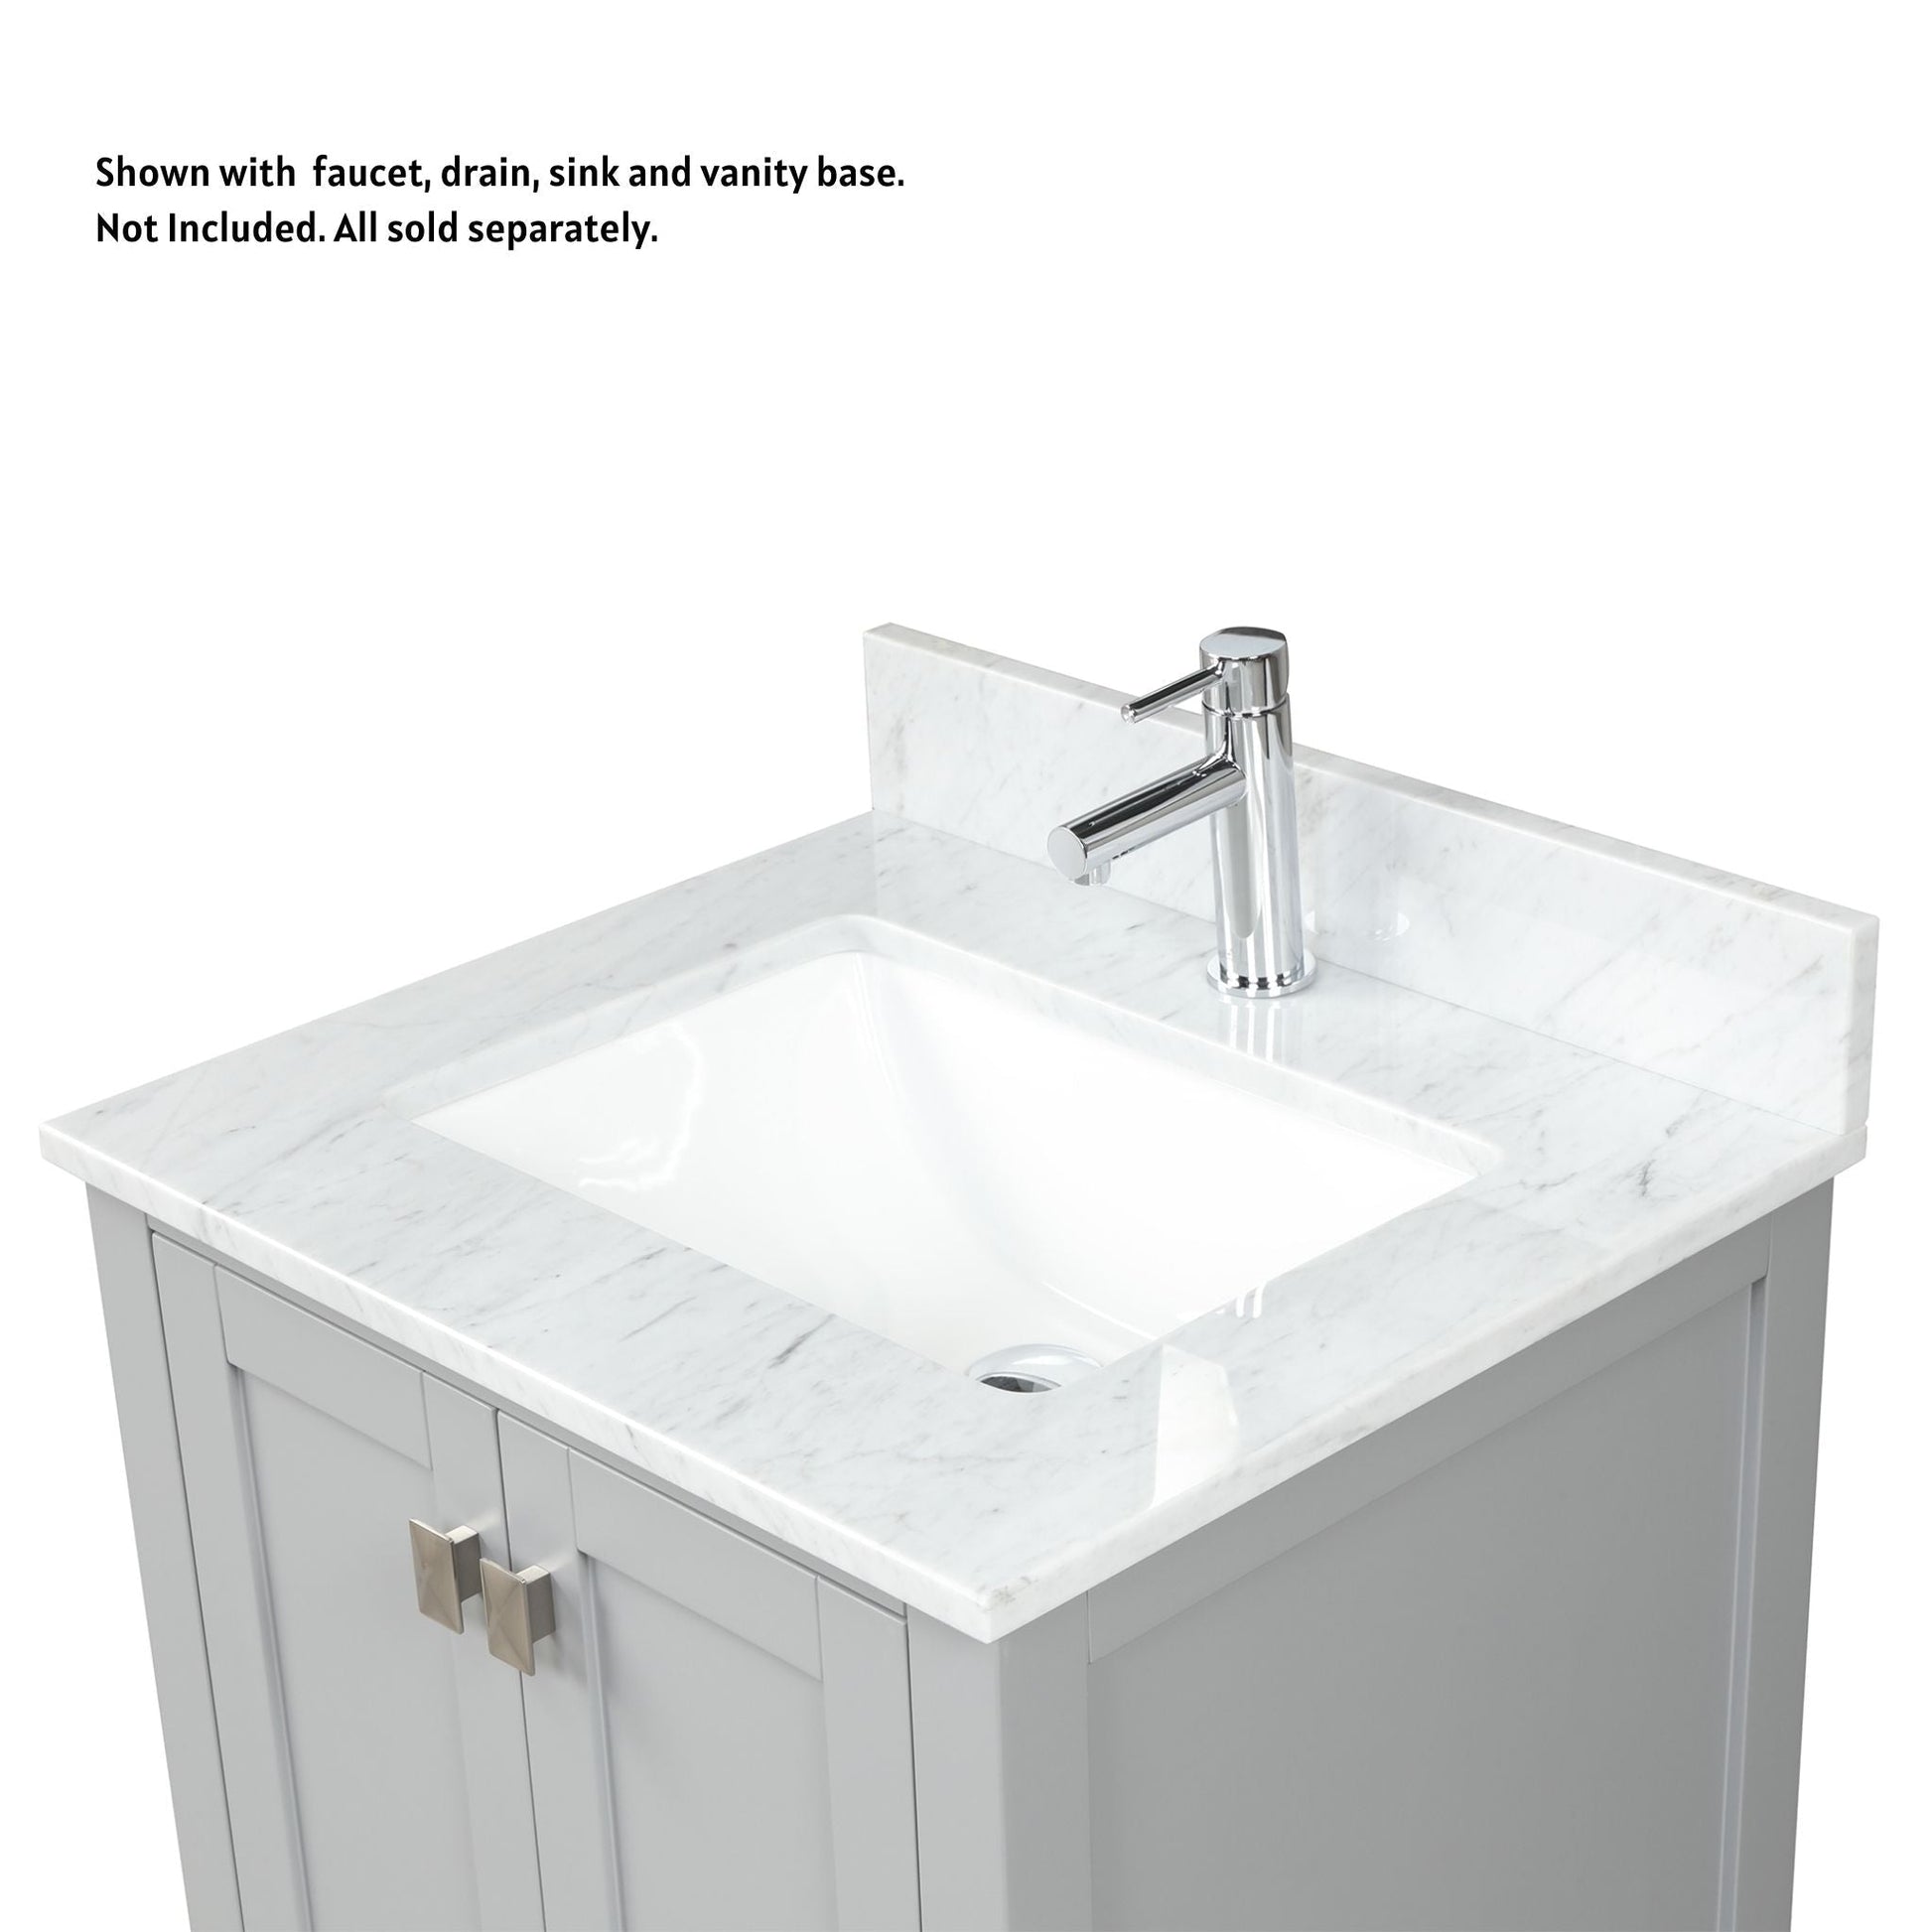 Blossom CT5 2422 03 2015 24" x 22" White Carrara Marble Vanity Top With Single Sink Hole And Backsplash